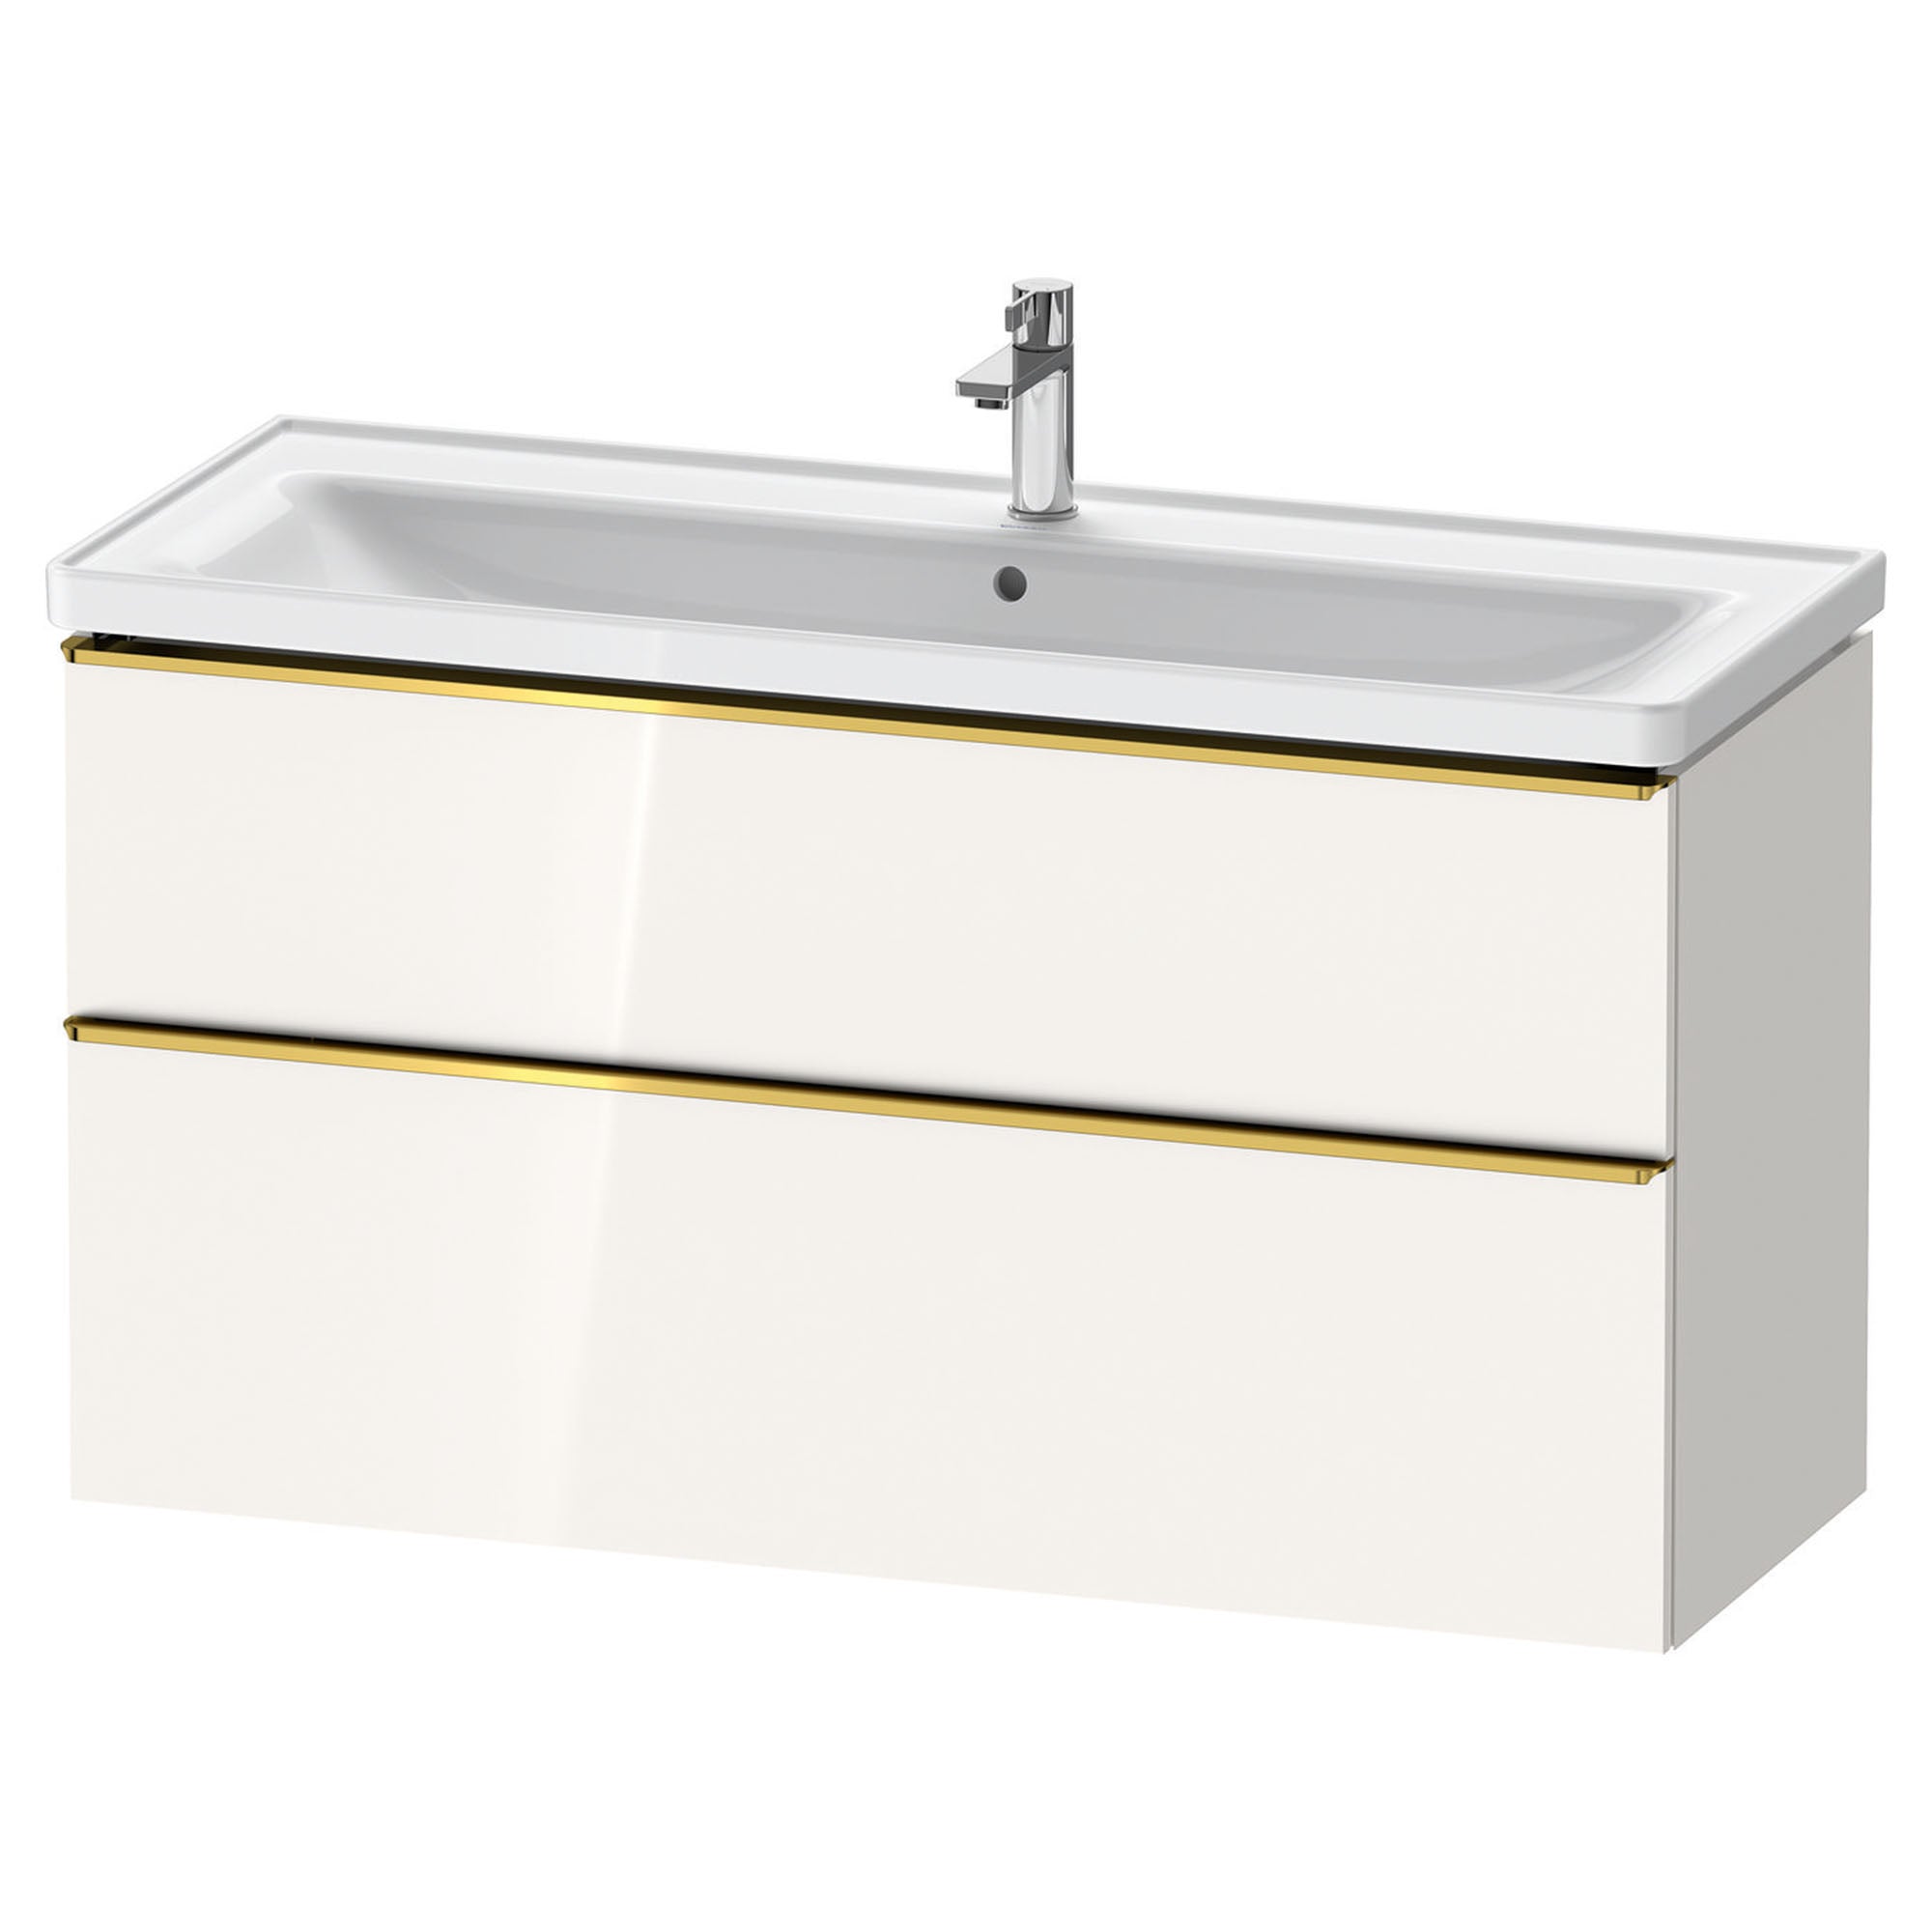 duravit d-neo 1200mm wall mounted vanity unit with d-neo basin gloss white gold handles